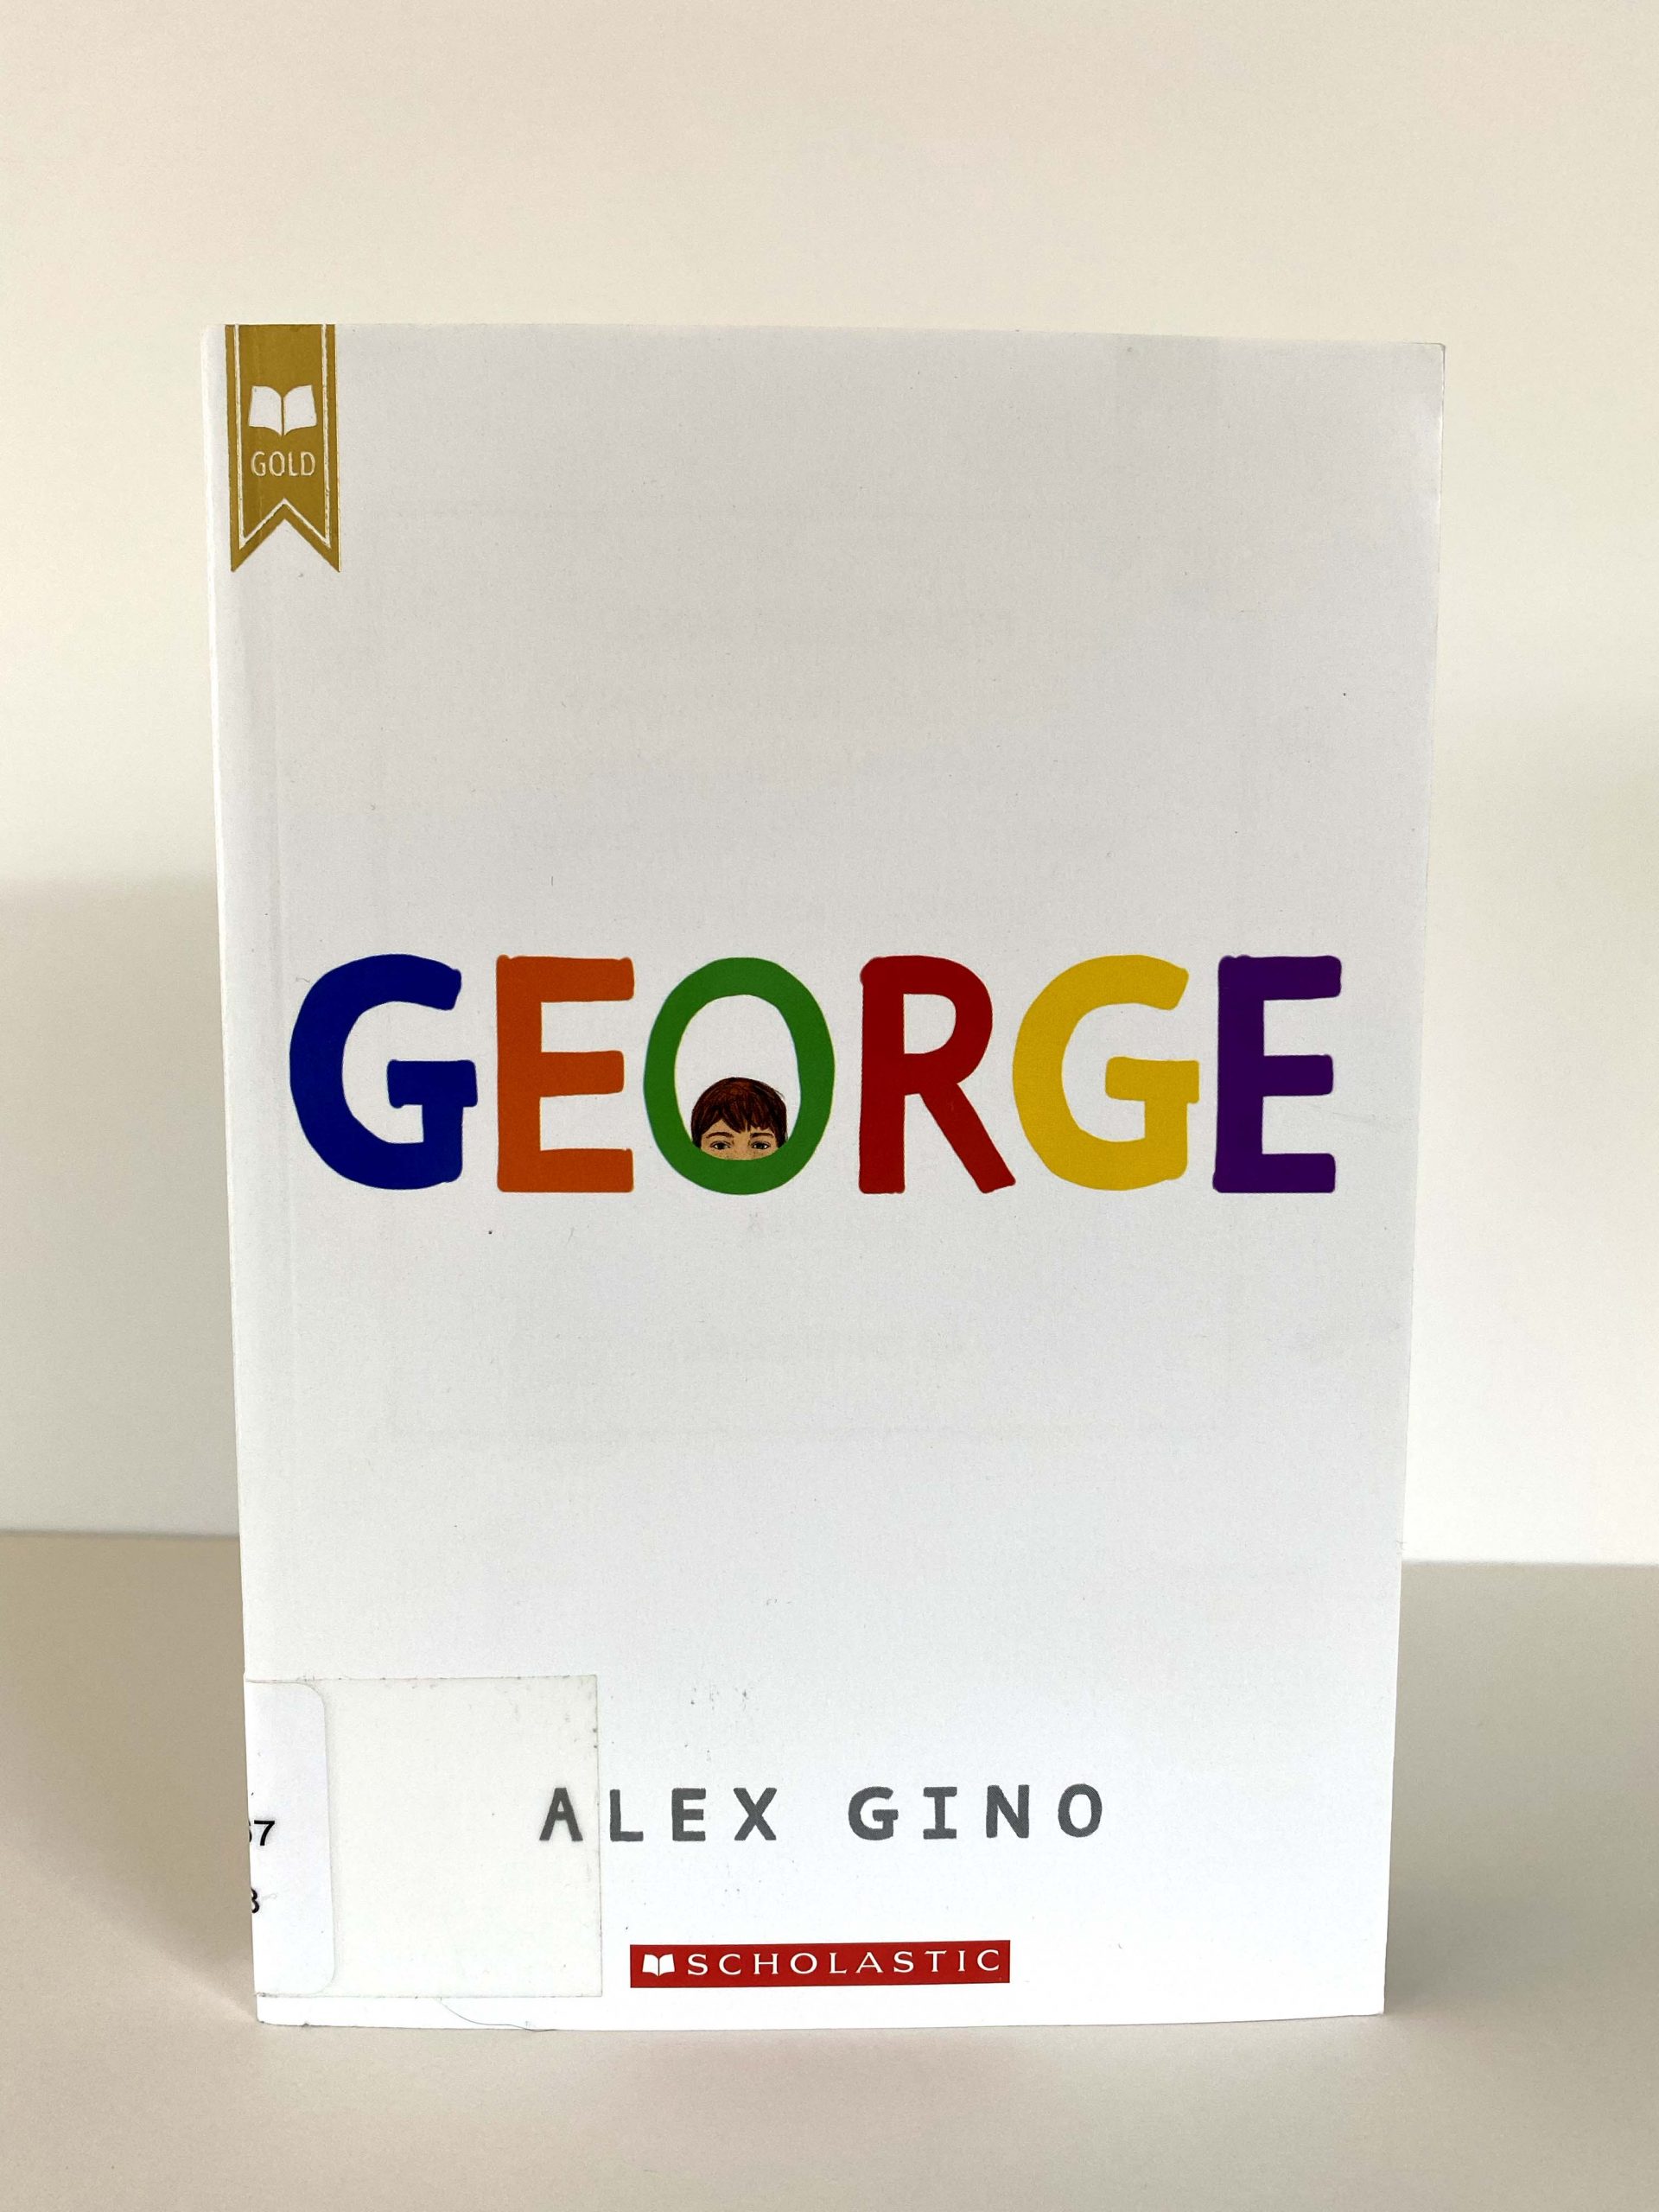 A book with colored letters that say "GEORGE," with a face peaking out from the O.